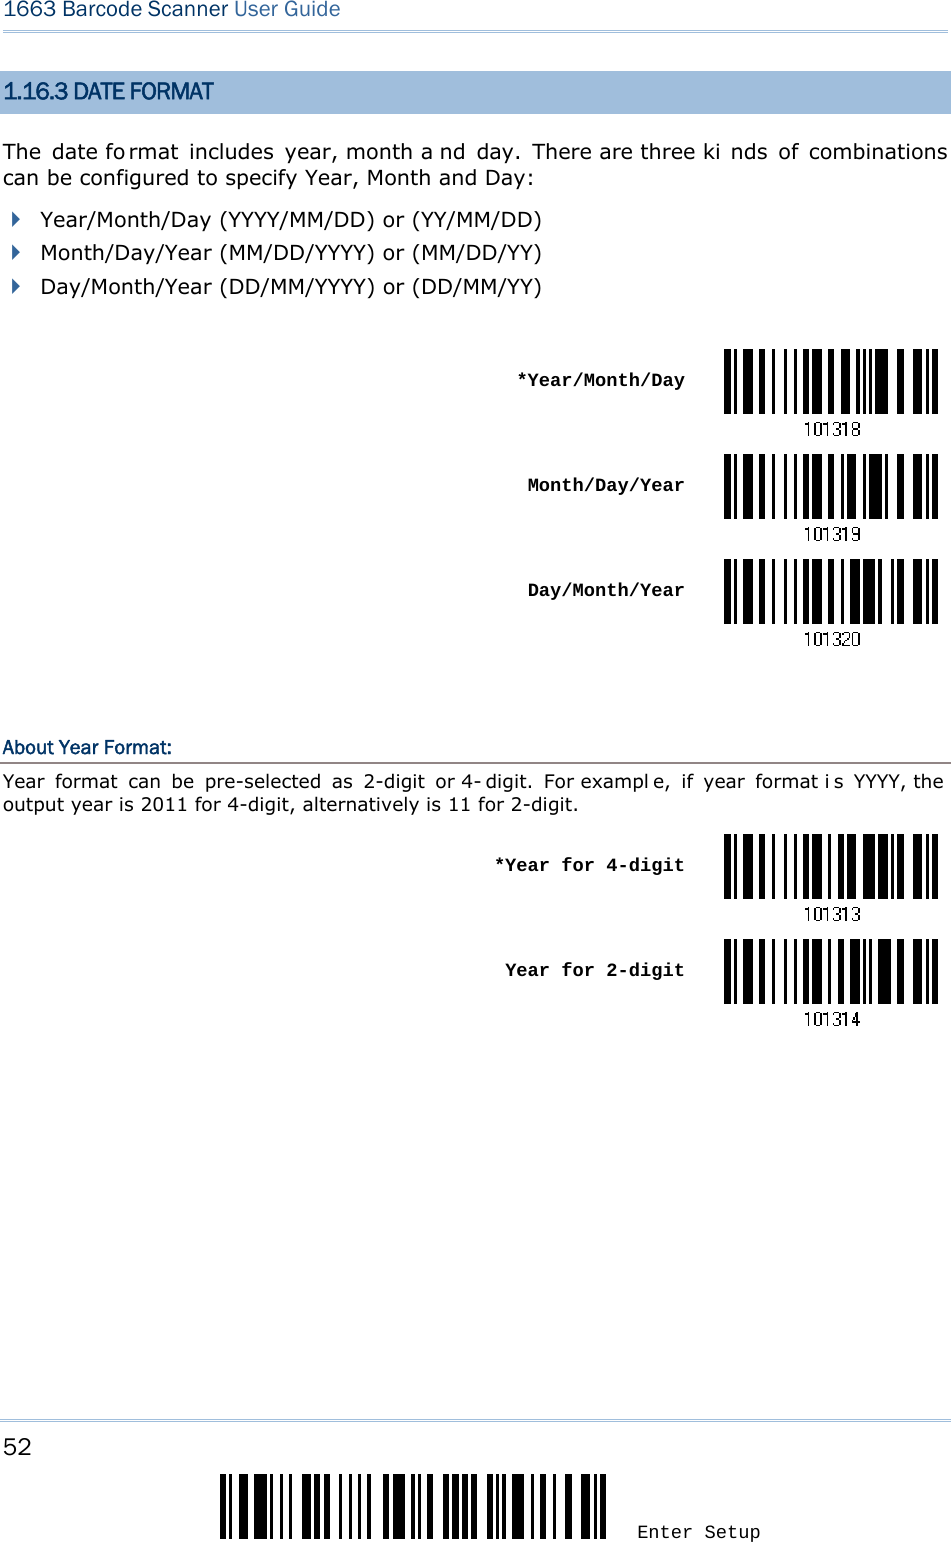 52 Enter Setup 1663 Barcode Scanner User Guide  1.16.3 DATE FORMAT The date fo rmat includes year, month a nd day. There are three ki nds of combinations can be configured to specify Year, Month and Day:  Year/Month/Day (YYYY/MM/DD) or (YY/MM/DD)  Month/Day/Year (MM/DD/YYYY) or (MM/DD/YY)  Day/Month/Year (DD/MM/YYYY) or (DD/MM/YY)   *Year/Month/Day Month/Day/Year Day/Month/Year  About Year Format: Year format can be pre-selected as 2-digit or 4- digit. For exampl e, if year format i s YYYY, the  output year is 2011 for 4-digit, alternatively is 11 for 2-digit.  *Year for 4-digit Year for 2-digit   